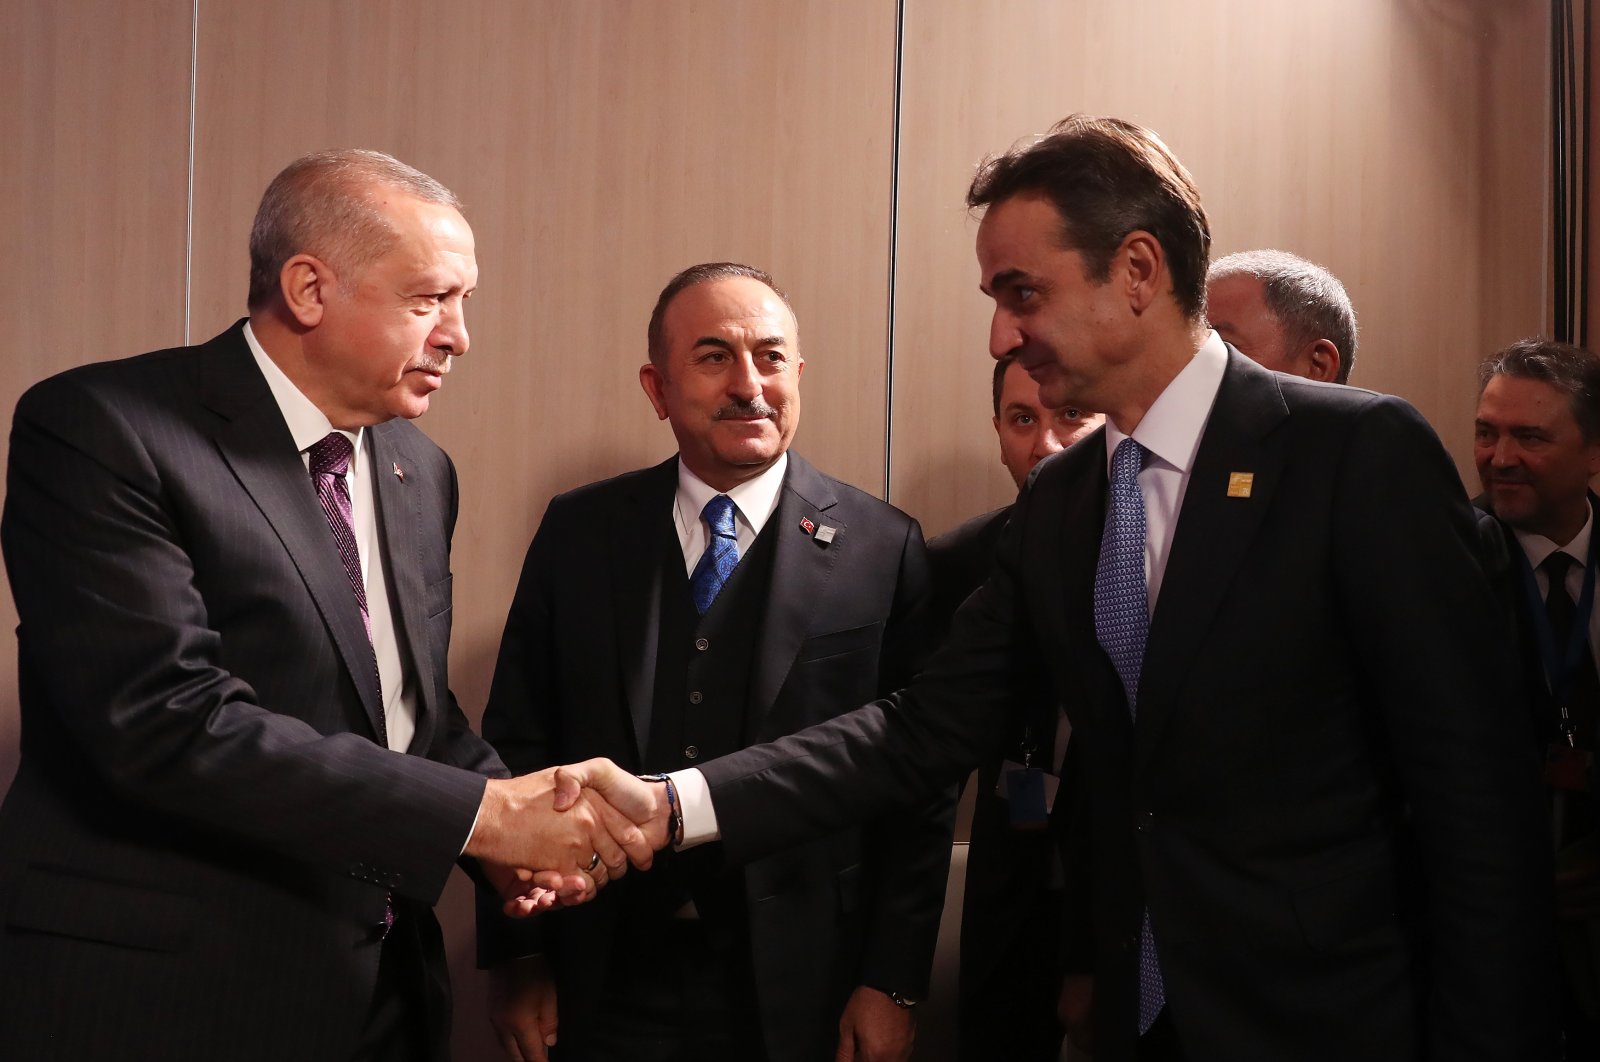 President Recep Tayyip Erdoğan shakes hands with Greek Prime Minister Kyriakos Mitsotakis for a meeting on the sidelines of a NATO leaders summit in London, United Kingdom, December 5, 2019. (AA Photo)